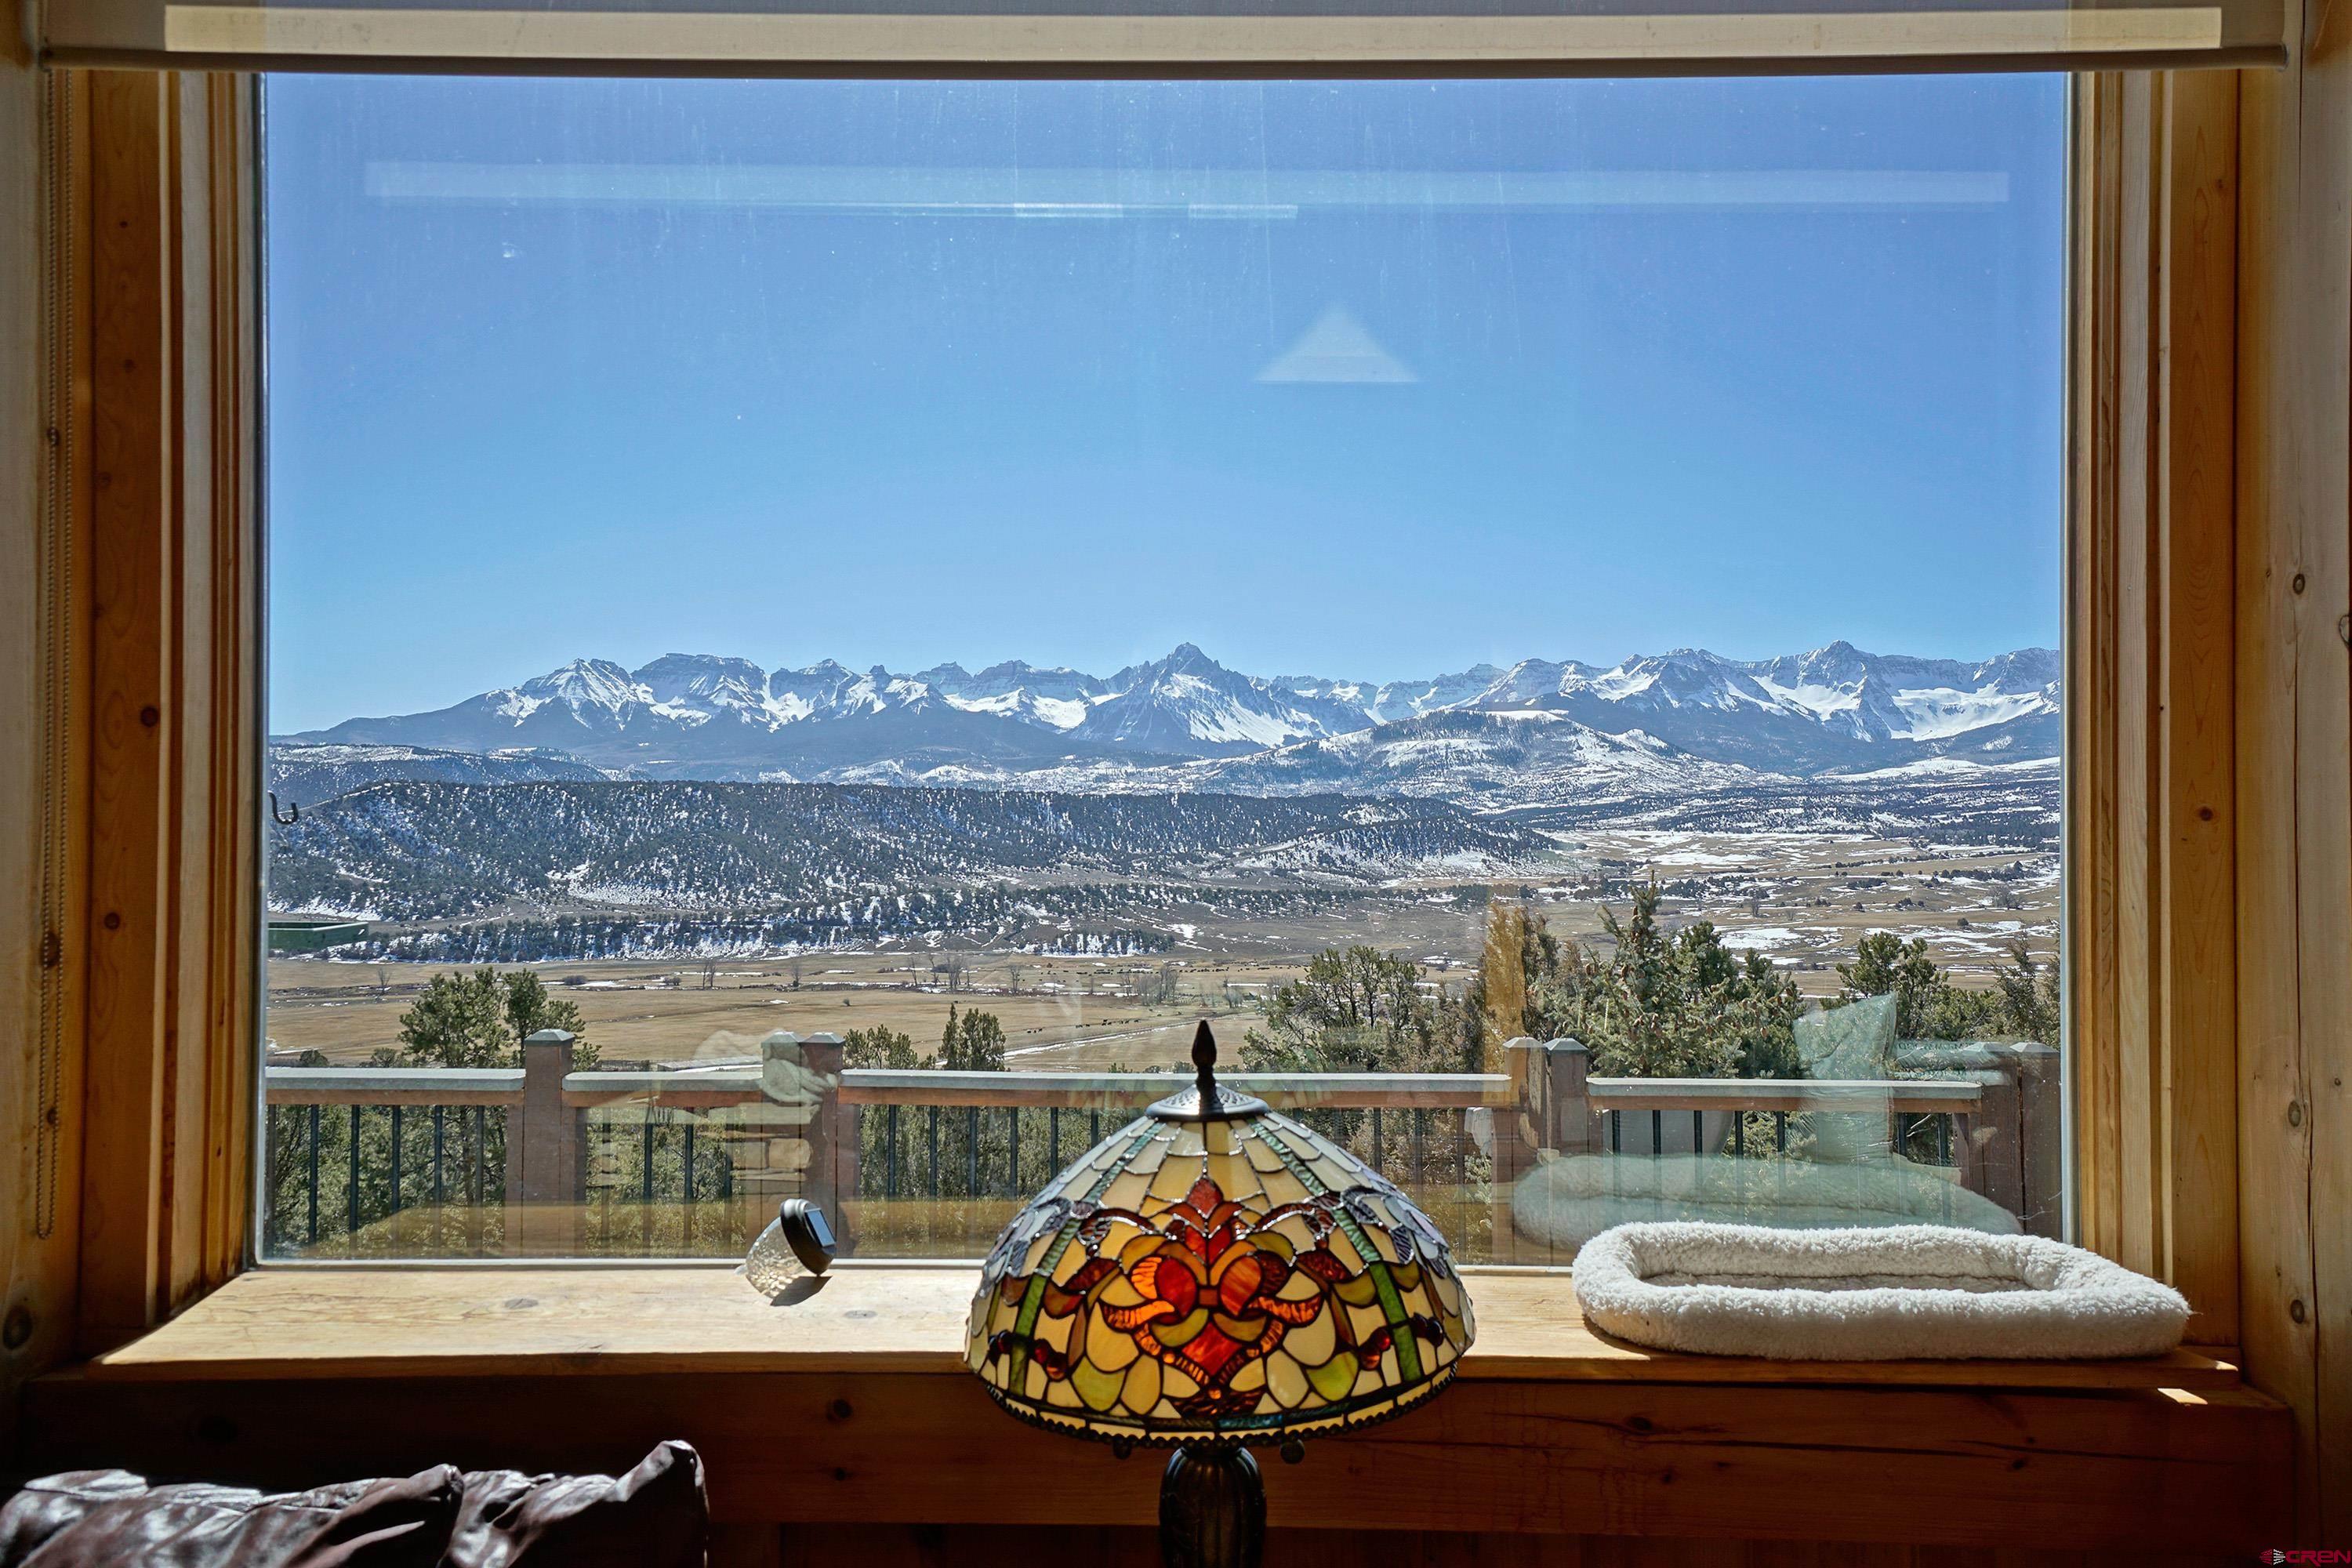 When you think of the Colorado and your dream home, it is about the mountain views.   You want a home with the BIG mountain views.   What does that mean?  You want to see Mt Sneffels framed by your living room windows.  You want to see all of the San Juans and all of the Cimarron Mountains.   You want to see Chimney Peak and the Courthouse turn yellow, orange, pink, lavender with the evening Alpenglow.   This Pleasant Valley 4 bedroom, 3 bath home situated on 3.14 acres checks all of the boxes.   Come in the front door and immediately you are surrounded by the cozy warmth of post and beam construction.  The open floor plan flows from living room, kitchen and  to dining room.  2 Sided Fireplace warms living room and kitchen open space.  There are 2 master suites, one on the main level and one on the upper level.  The lower level features 2 bedrooms, one full bath, living room, sun room and walk out to the garden.  It is a home which invites the outside inside with decks bounding the dining room and living room.  Need space for vehicles and toys?  Got it with an oversized 2 car detached garage with studio space above.  Well established yard and garden with drip system is fenced for you and your pets enjoyment.  Pleasant Valley is known for its magnificent mountain and valley views.  It is a location close to where you want to go.  15 mins to the Town of Ridgway, 40 minutes to Telluride, less than an hour to the Montrose Airport.    Hike, bike, walk, run right from your front door.